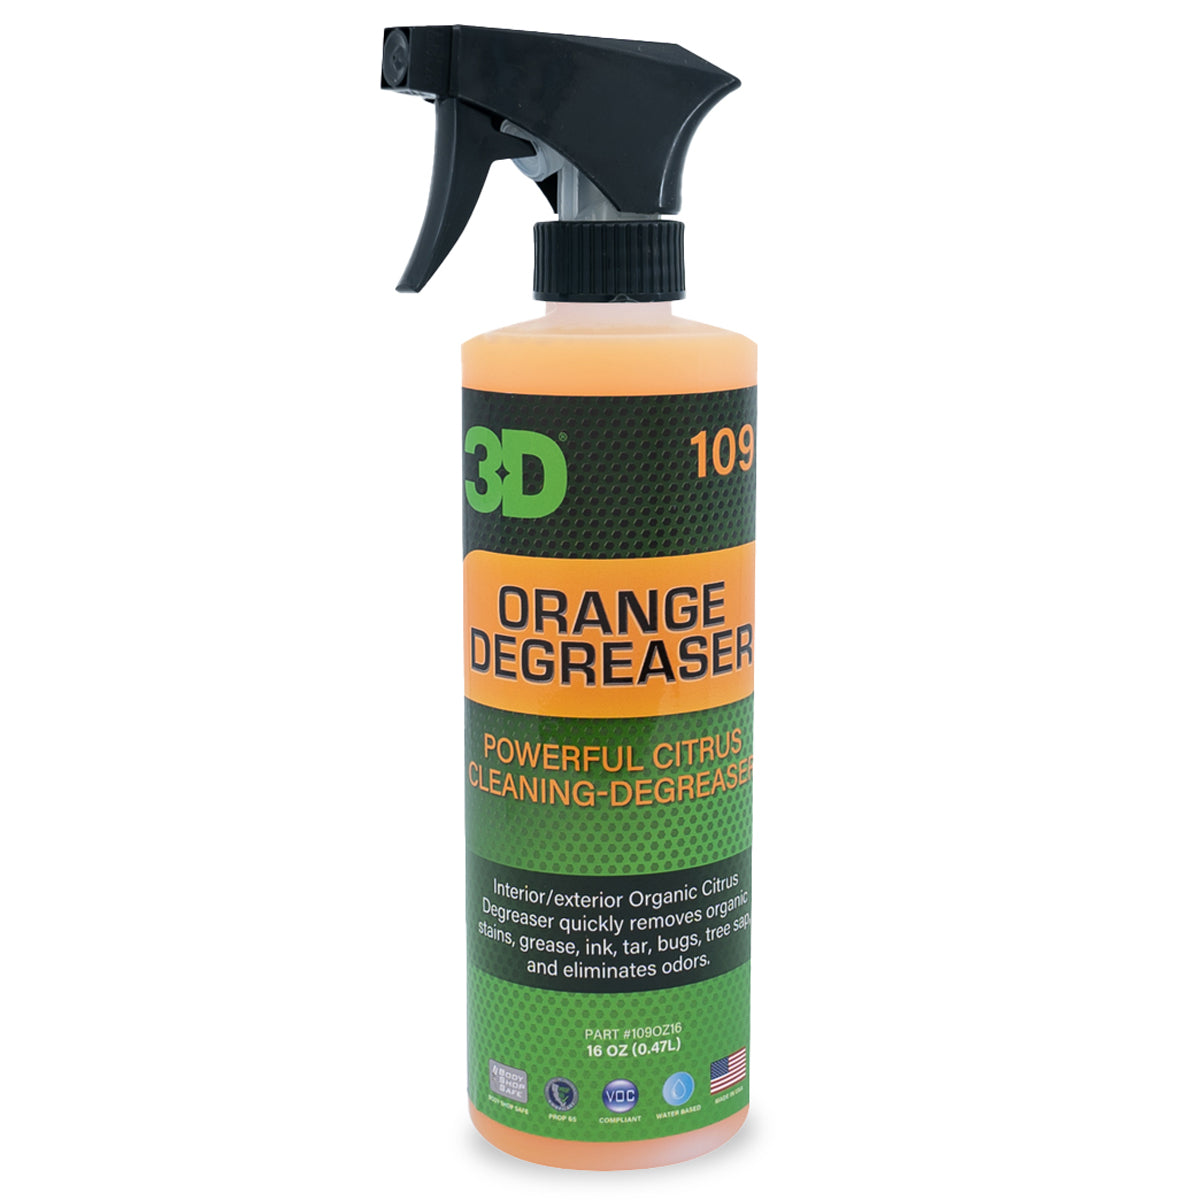 Orange Cleaner Degreaser, 1-Gallon Concentrate for Oil Removal, Grease  Stains and Heavy Duty Automotive, Outdoor, Floor Cleaning, Grease & Gunk